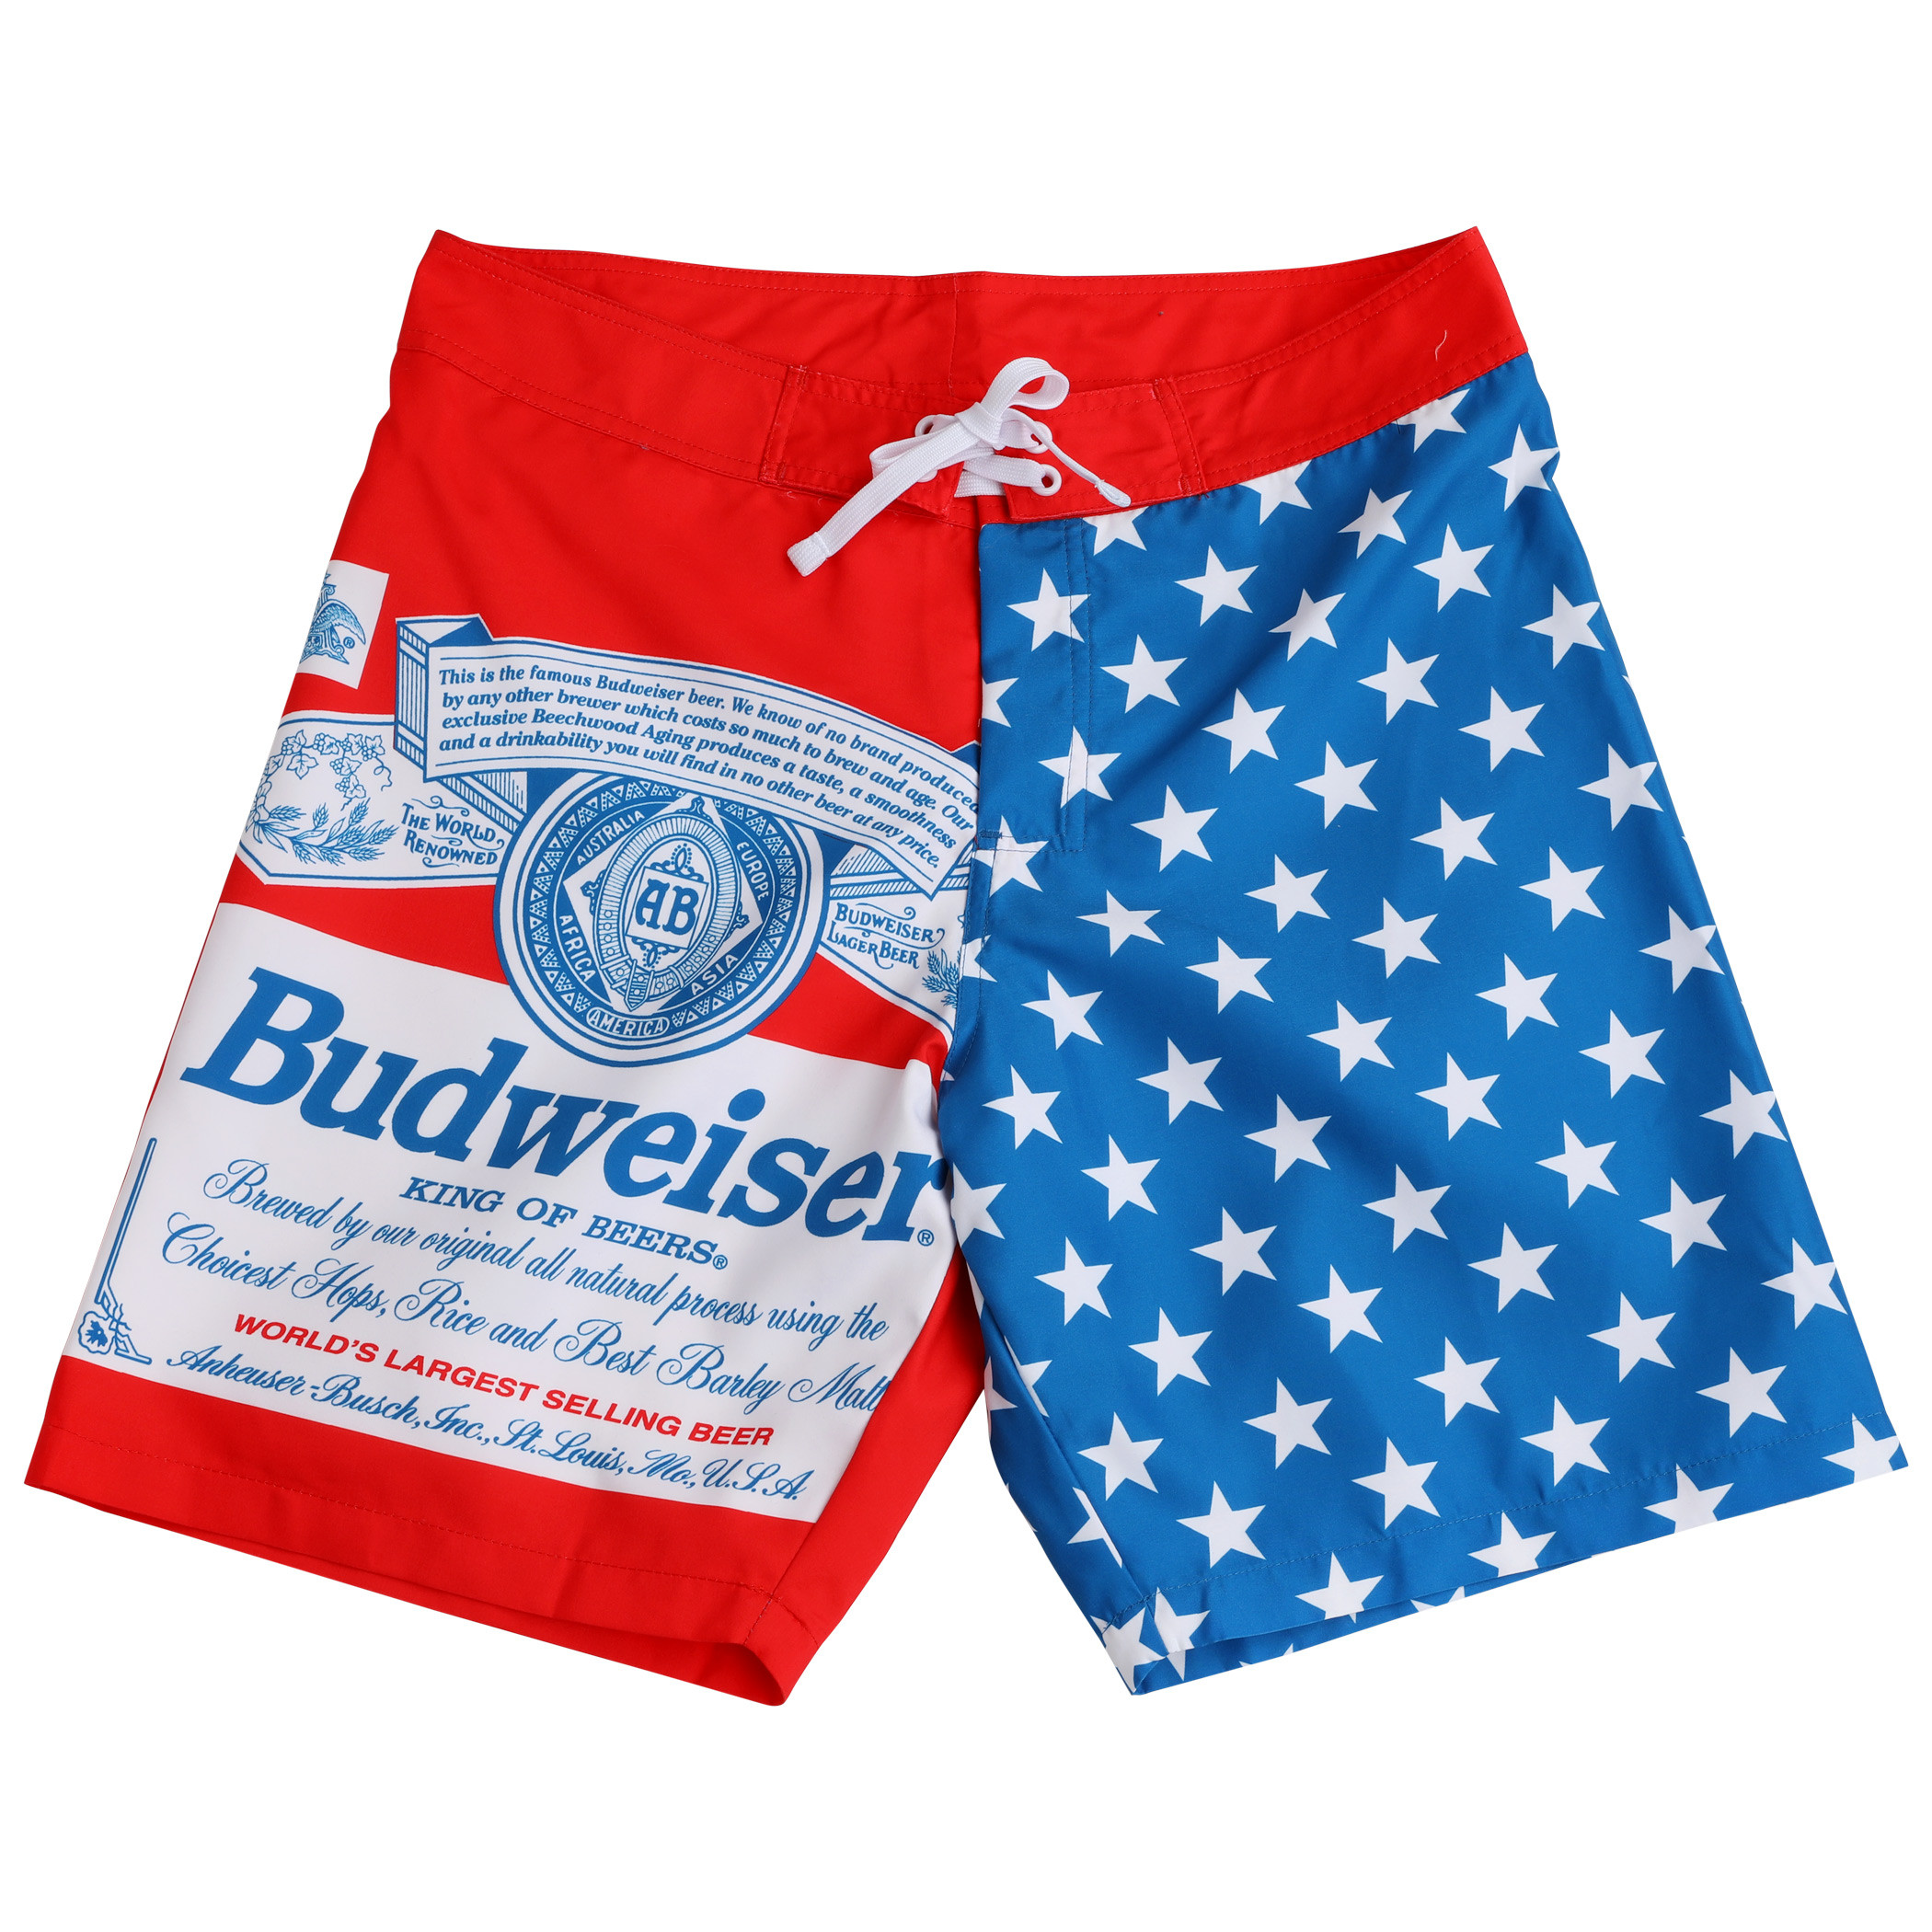 Budweiser Stars and Stripes Board Shorts